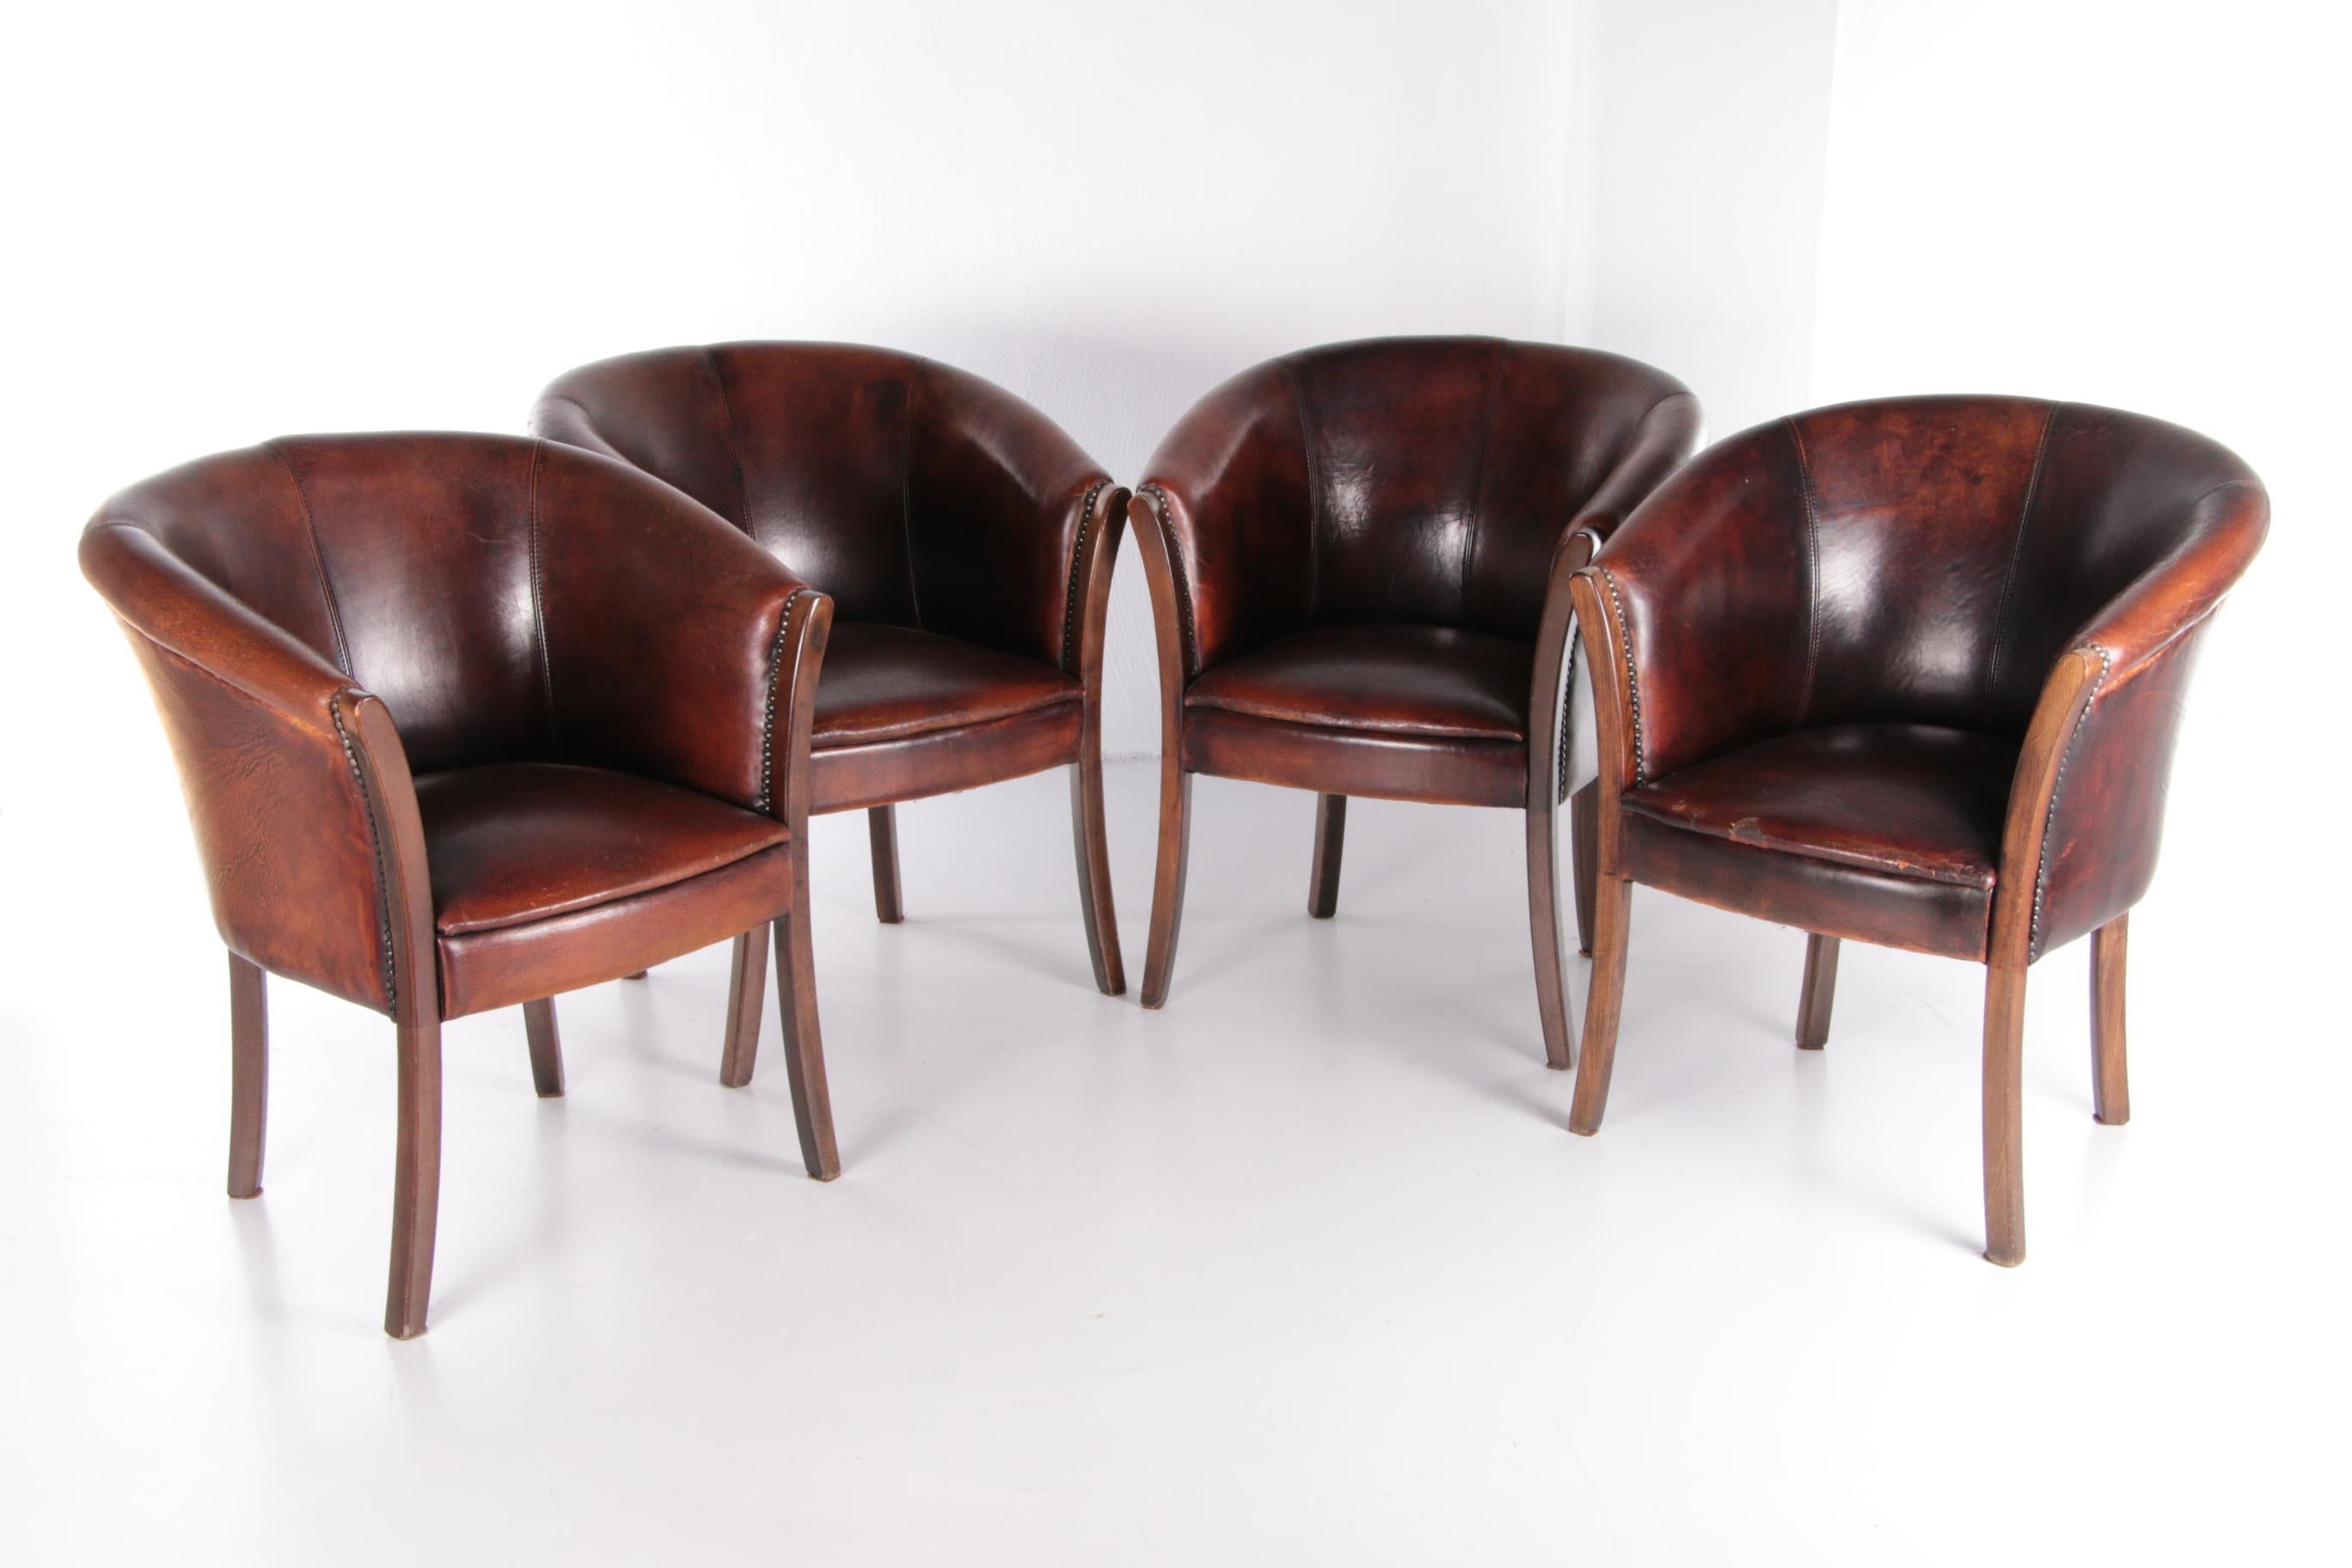 This is a set of 4 dining room chairs made of sheep leather.

A lovely seat and excellent seating comfort for long dining.

The legs are made of wood and they are nicely finished, also nicely finished with nails.

These chairs were made around